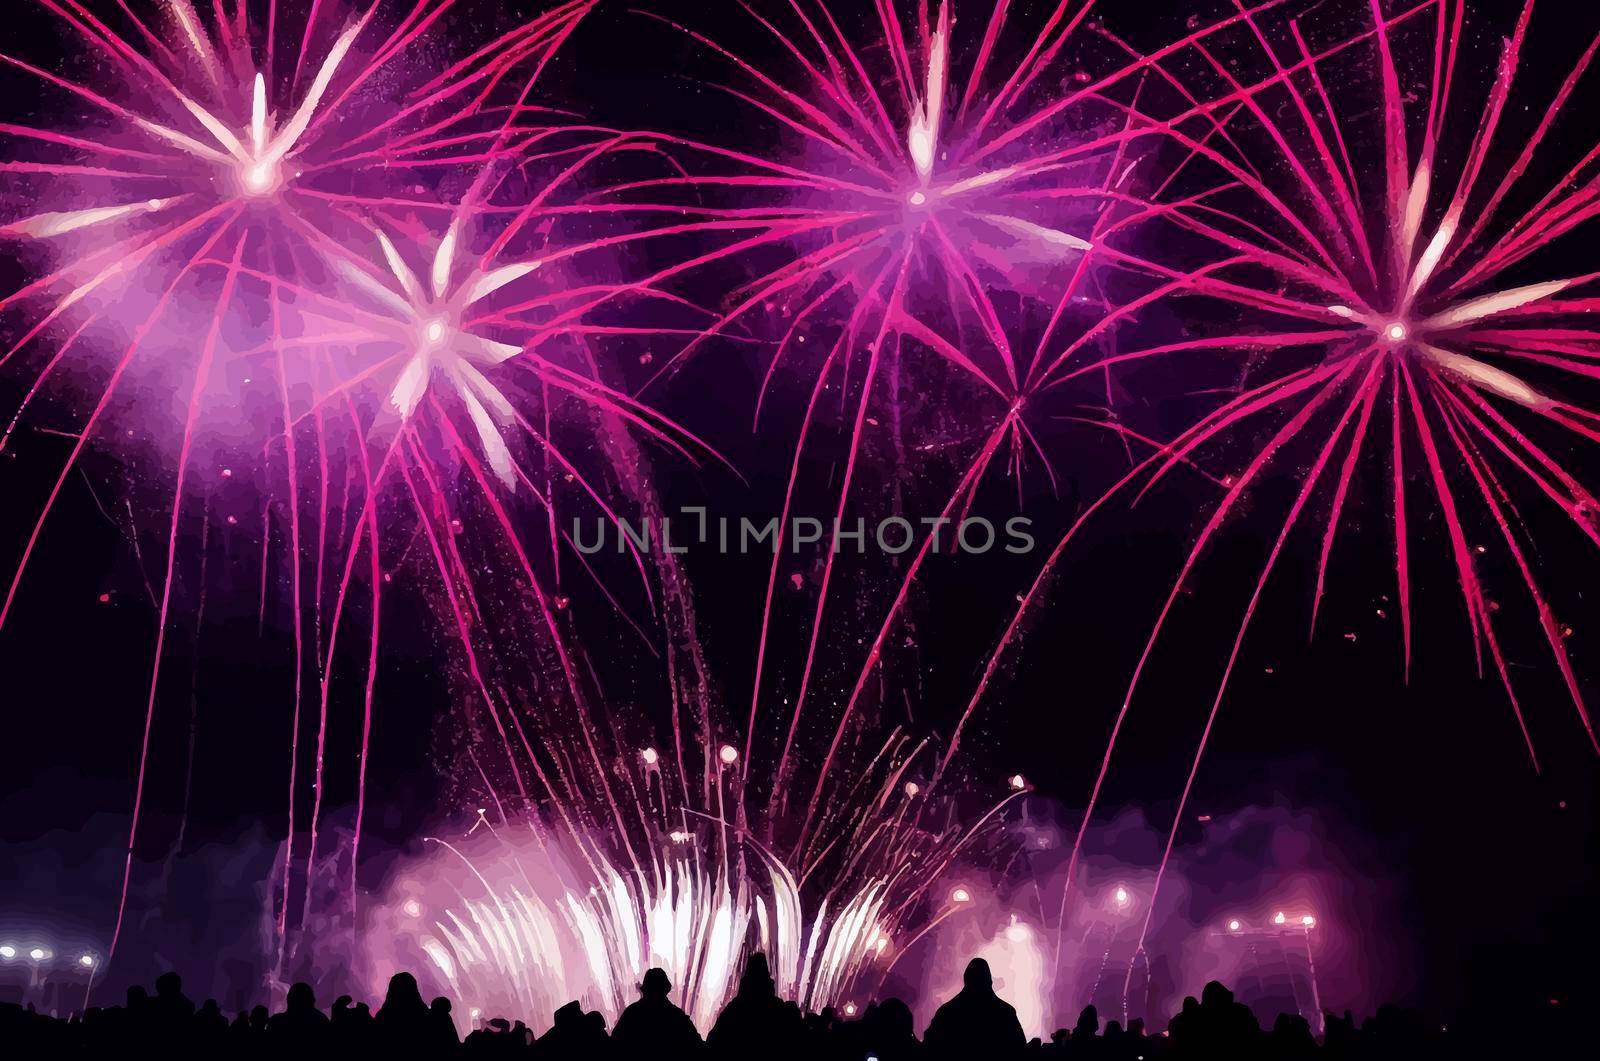 Abstract fireworks background. Fireworks light up in the sky, concept of celebration. by JpRamos